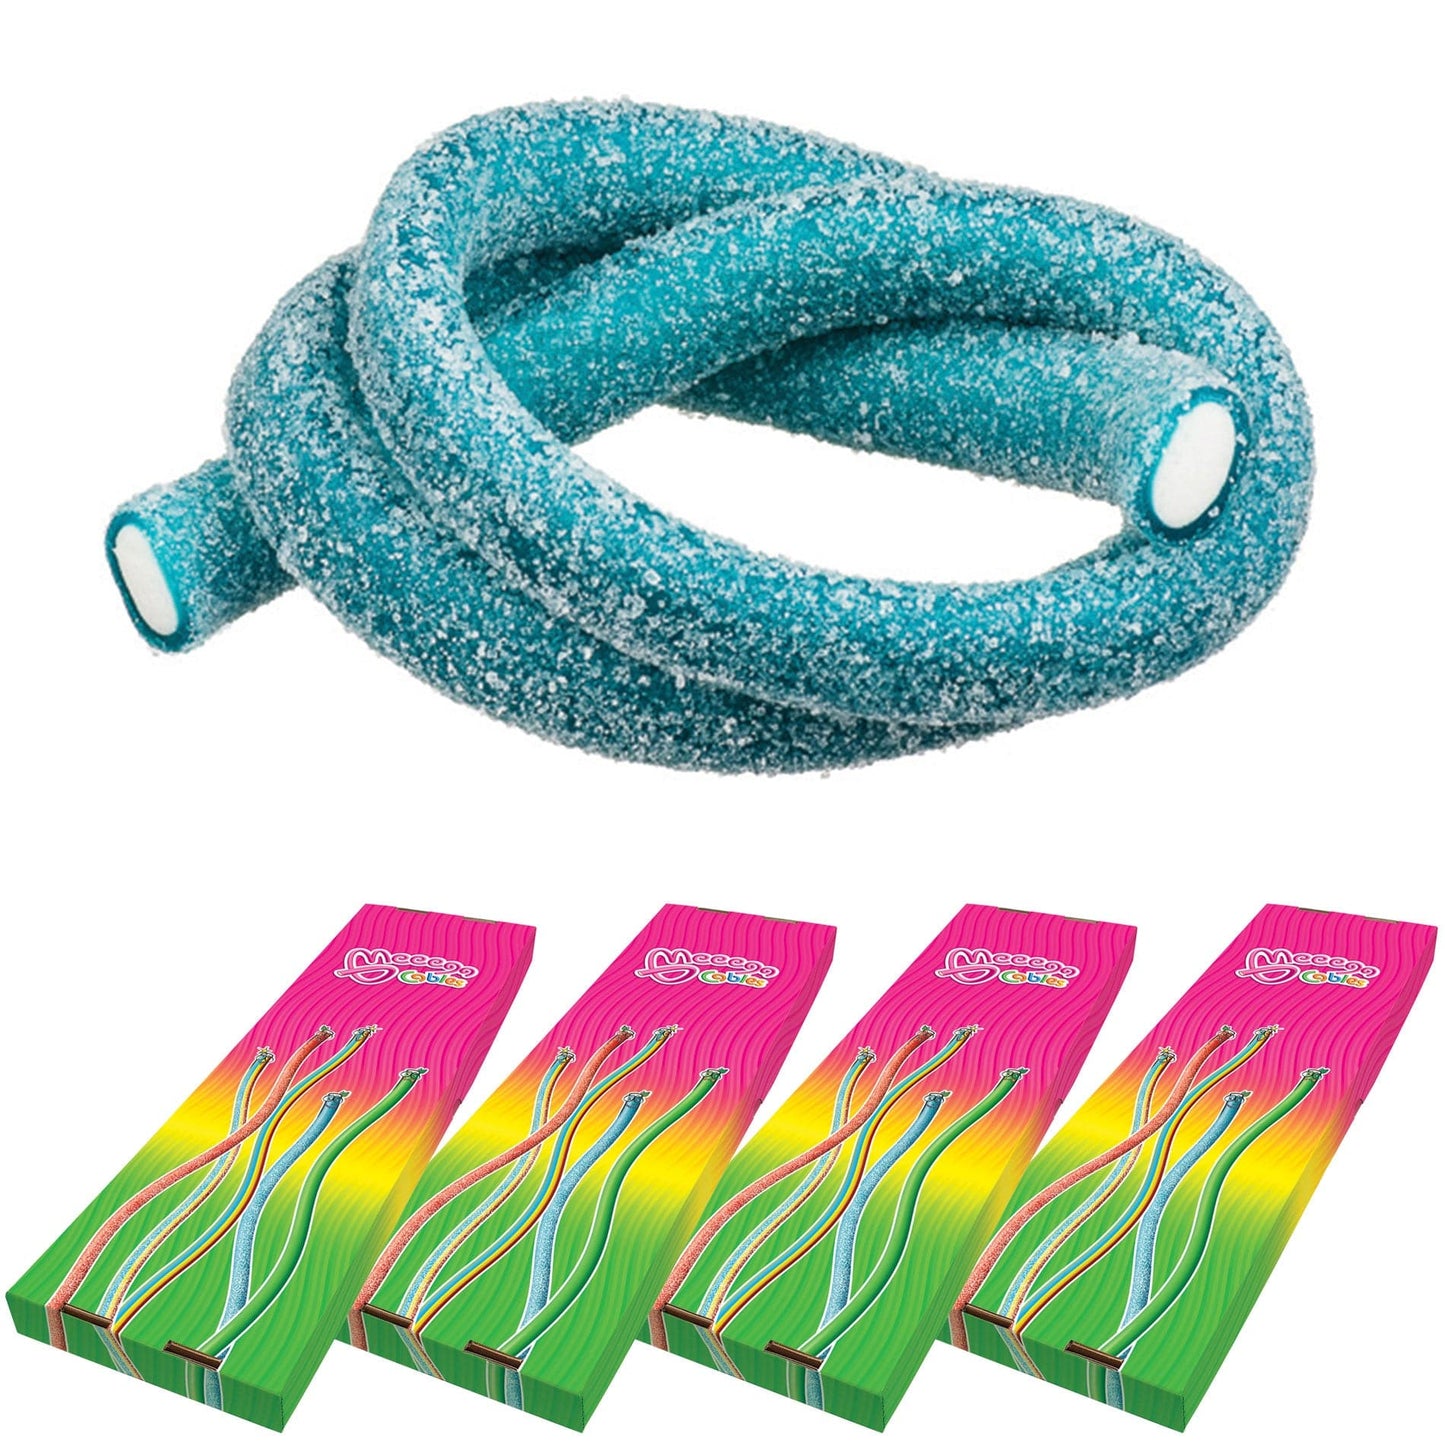 Novelty Concessions Gummy Rope SOUR BLUEBERRY / 4 Pack (120 pieces) Meeega Cables European Chewy Rope Candy - Box of 30 individually wrapped Meeega Cables, each over 2-feet long cups with lids and straws